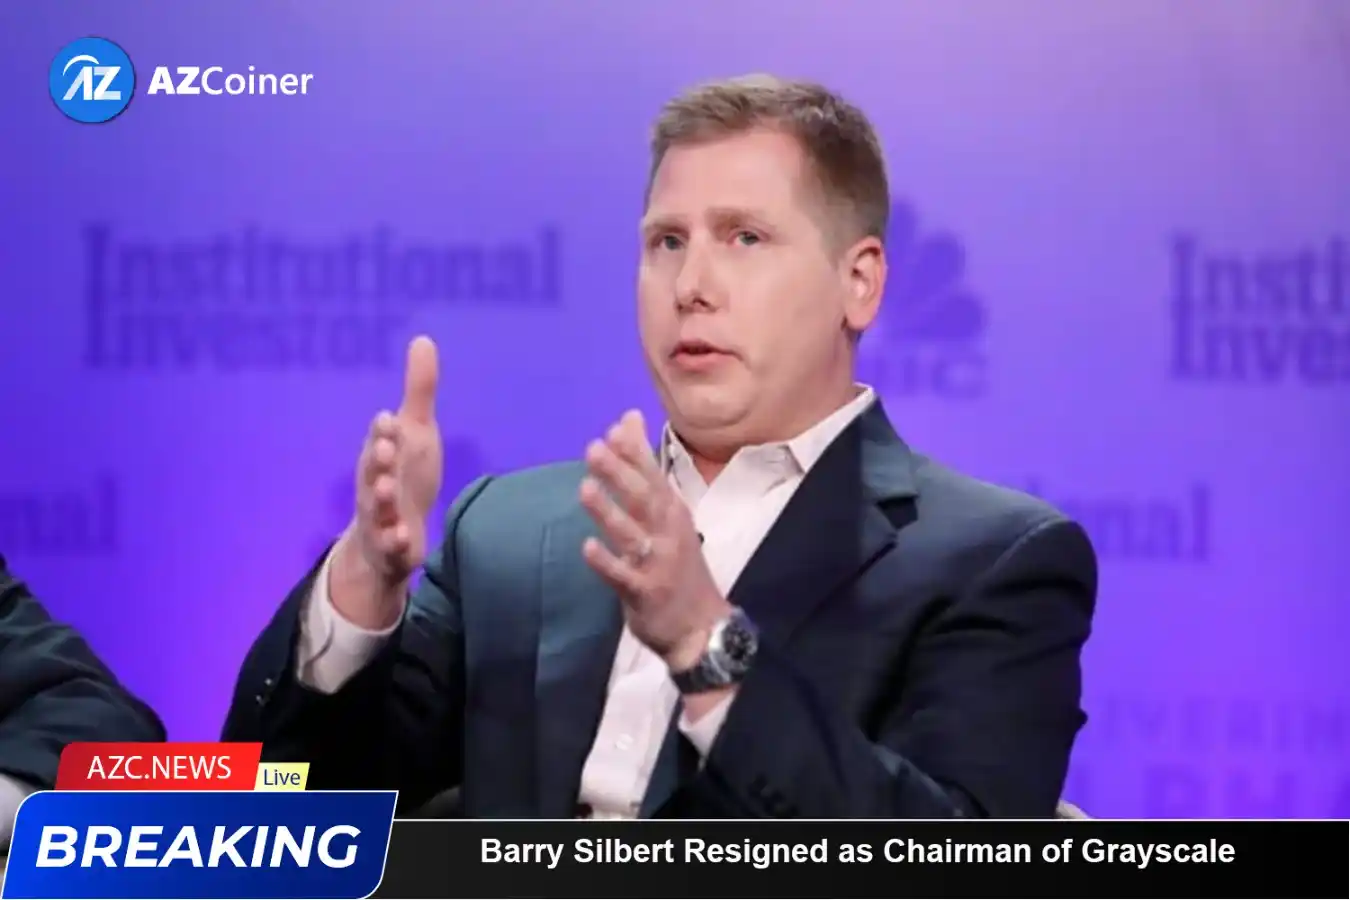 Barry Silbert Resigned As Chairman Of Grayscale_65bacf909e077.webp